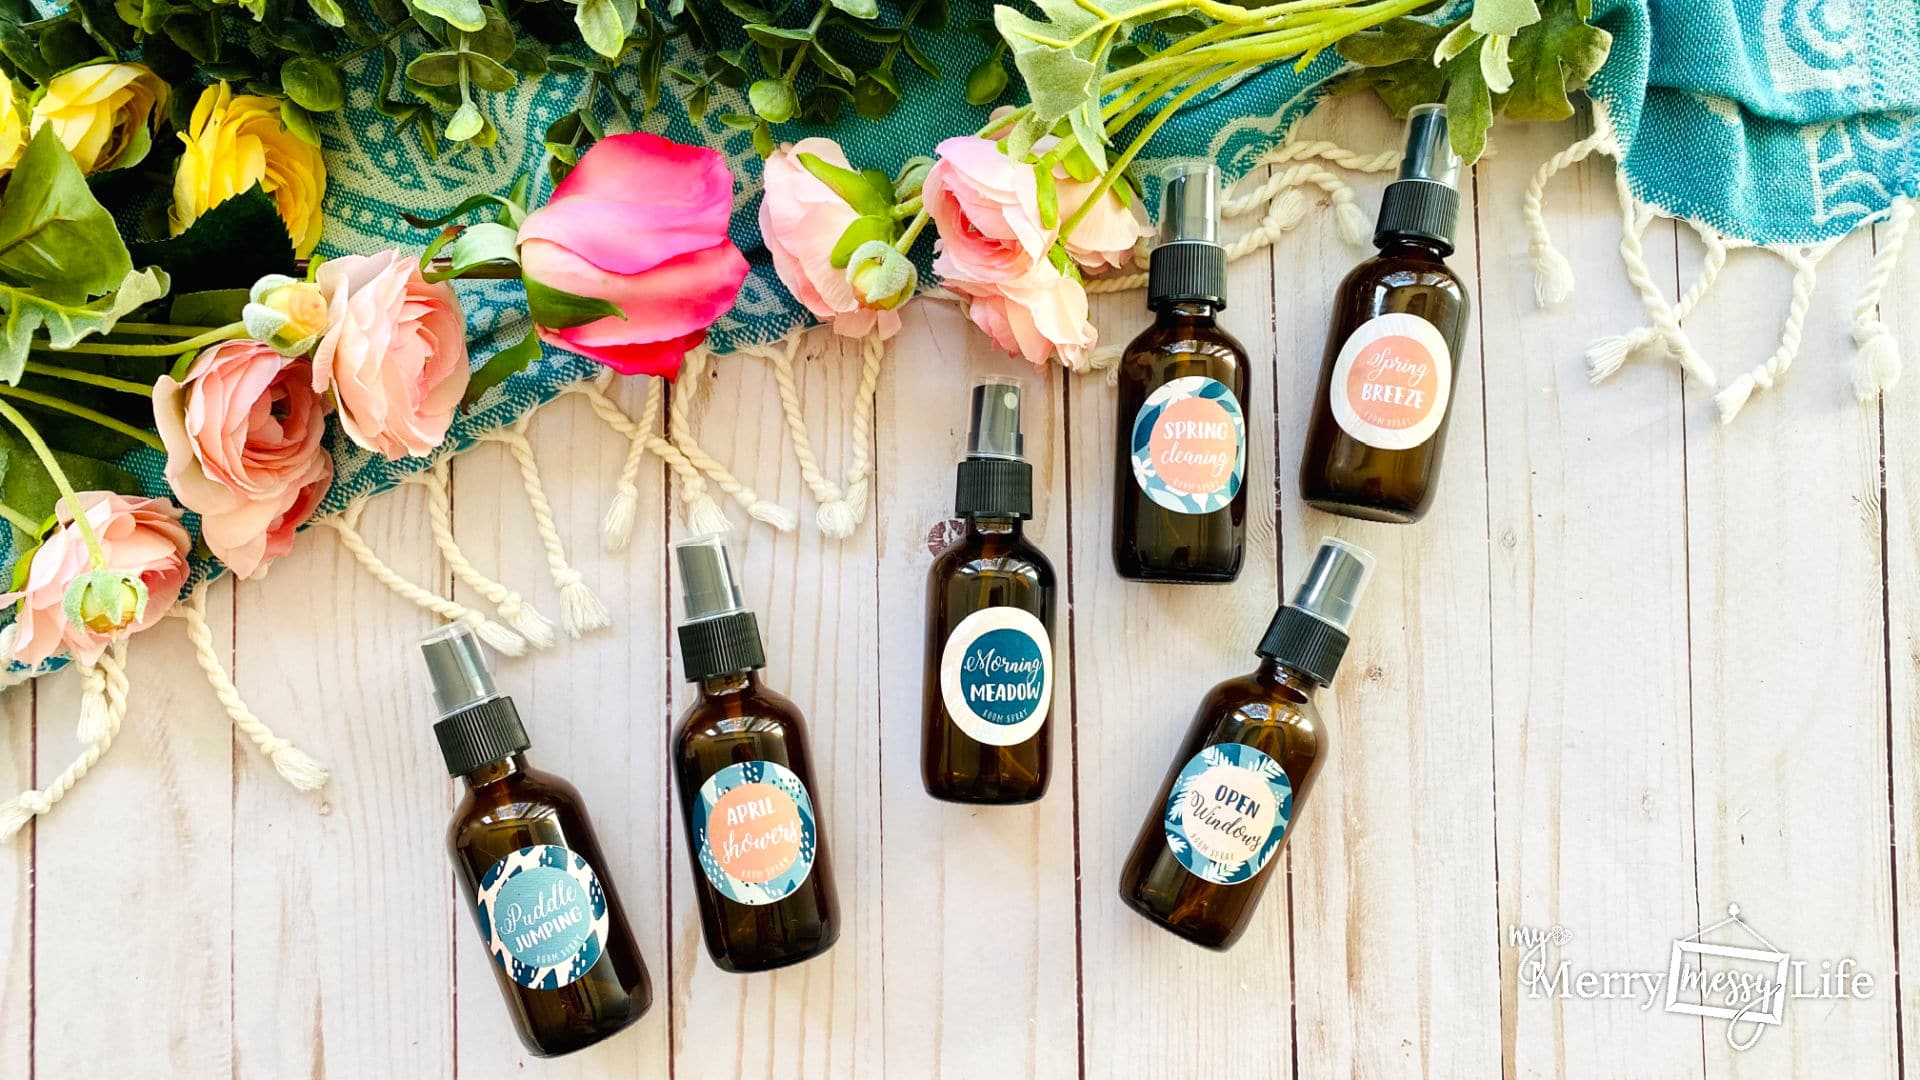 6 Spring Room Spray Recipes to bring the fresh scents of spring into your home using pure essential oils